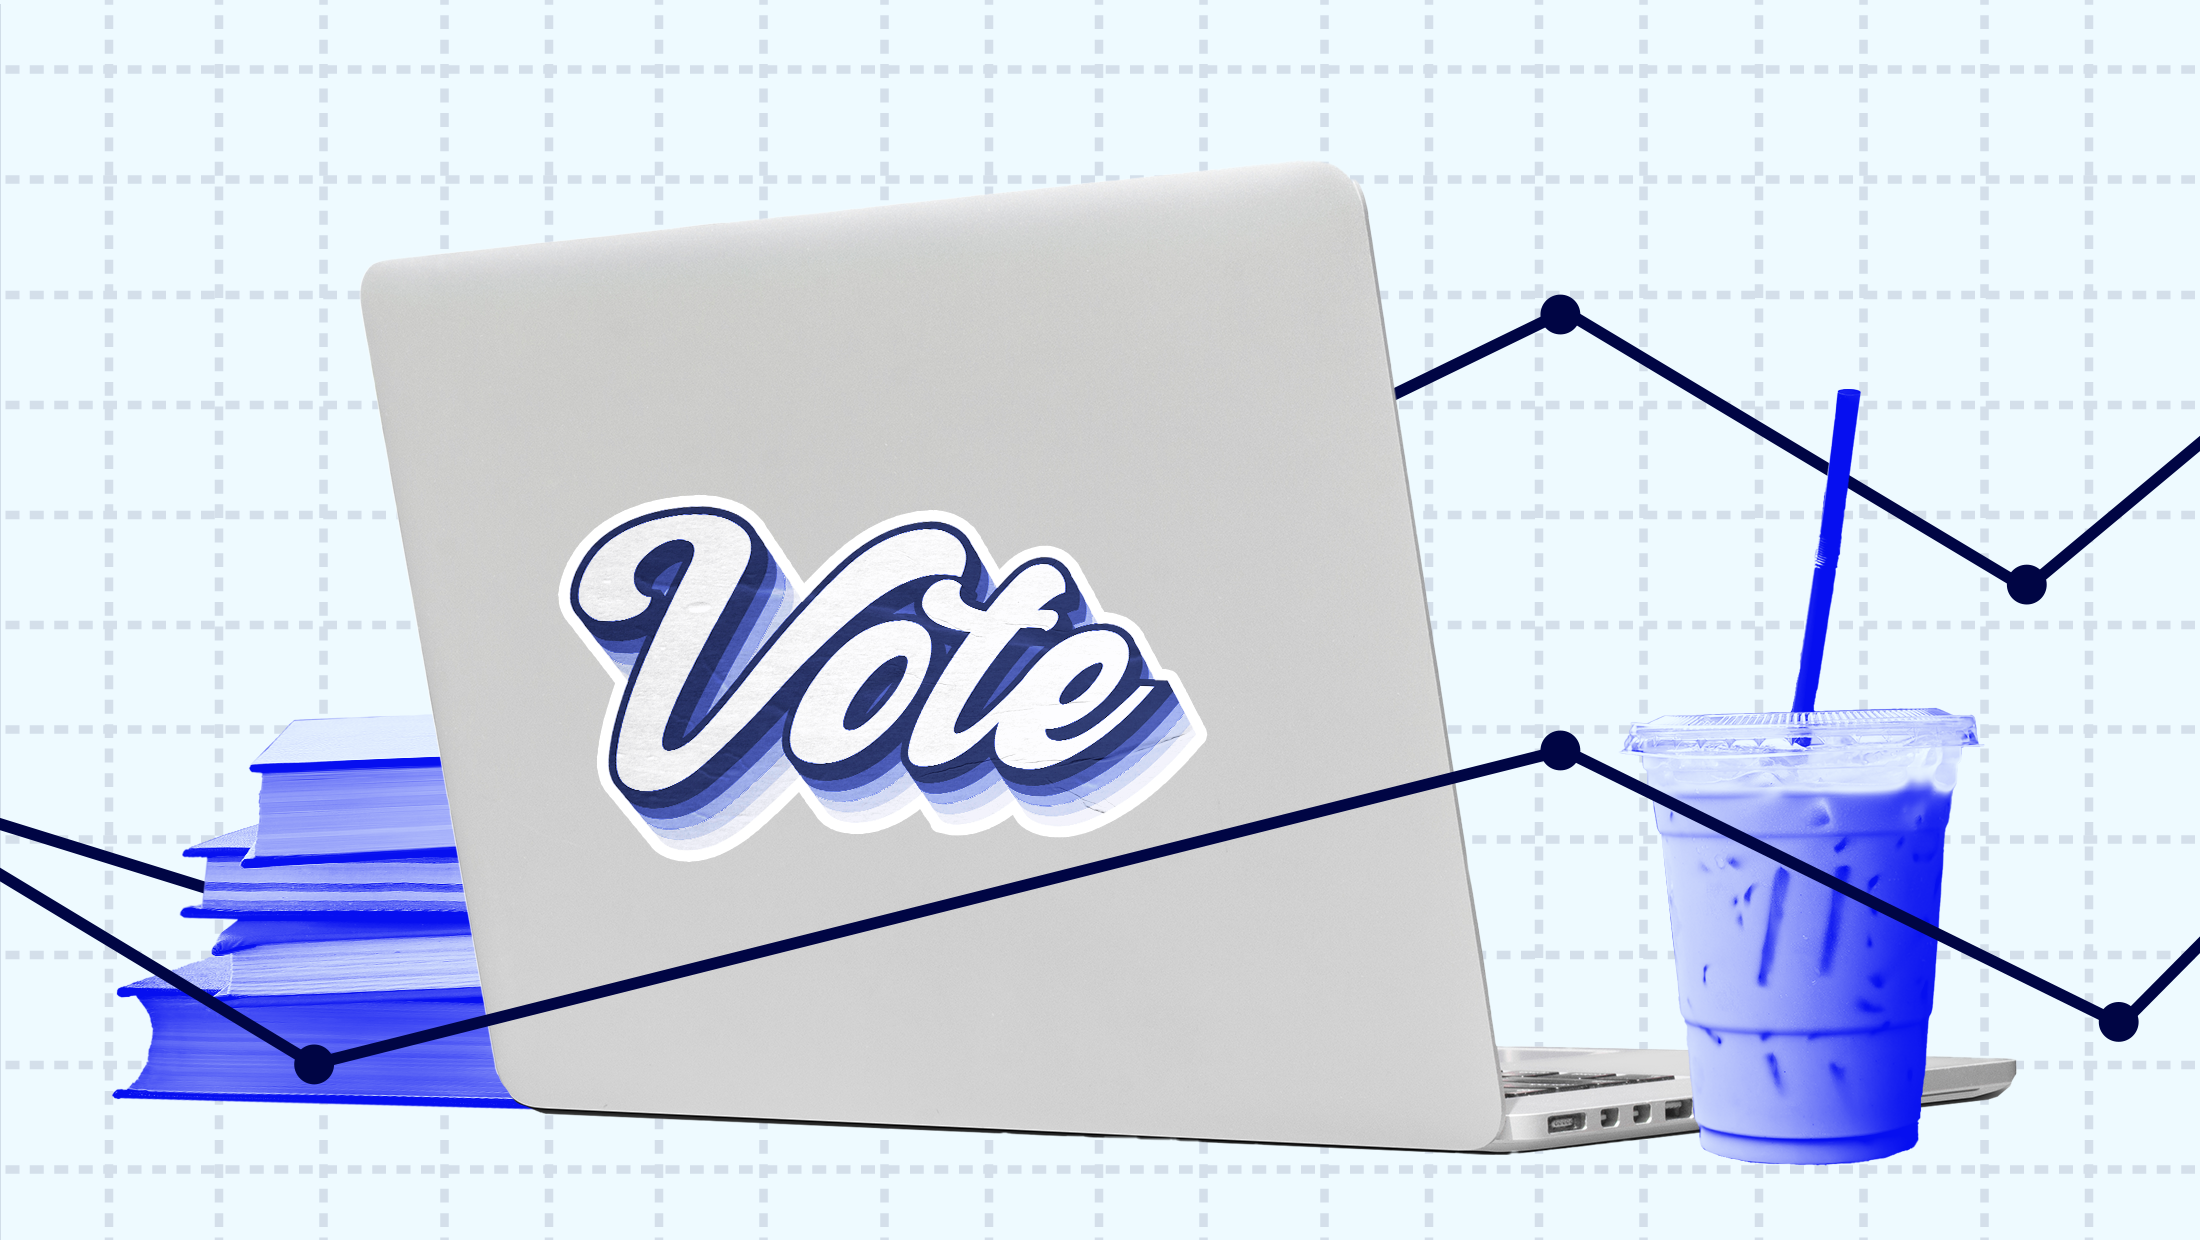 A laptop with a "VOTE" sticker flanked by a stack of textbooks and an iced coffee, mounted on a piece of graph paper with various data points